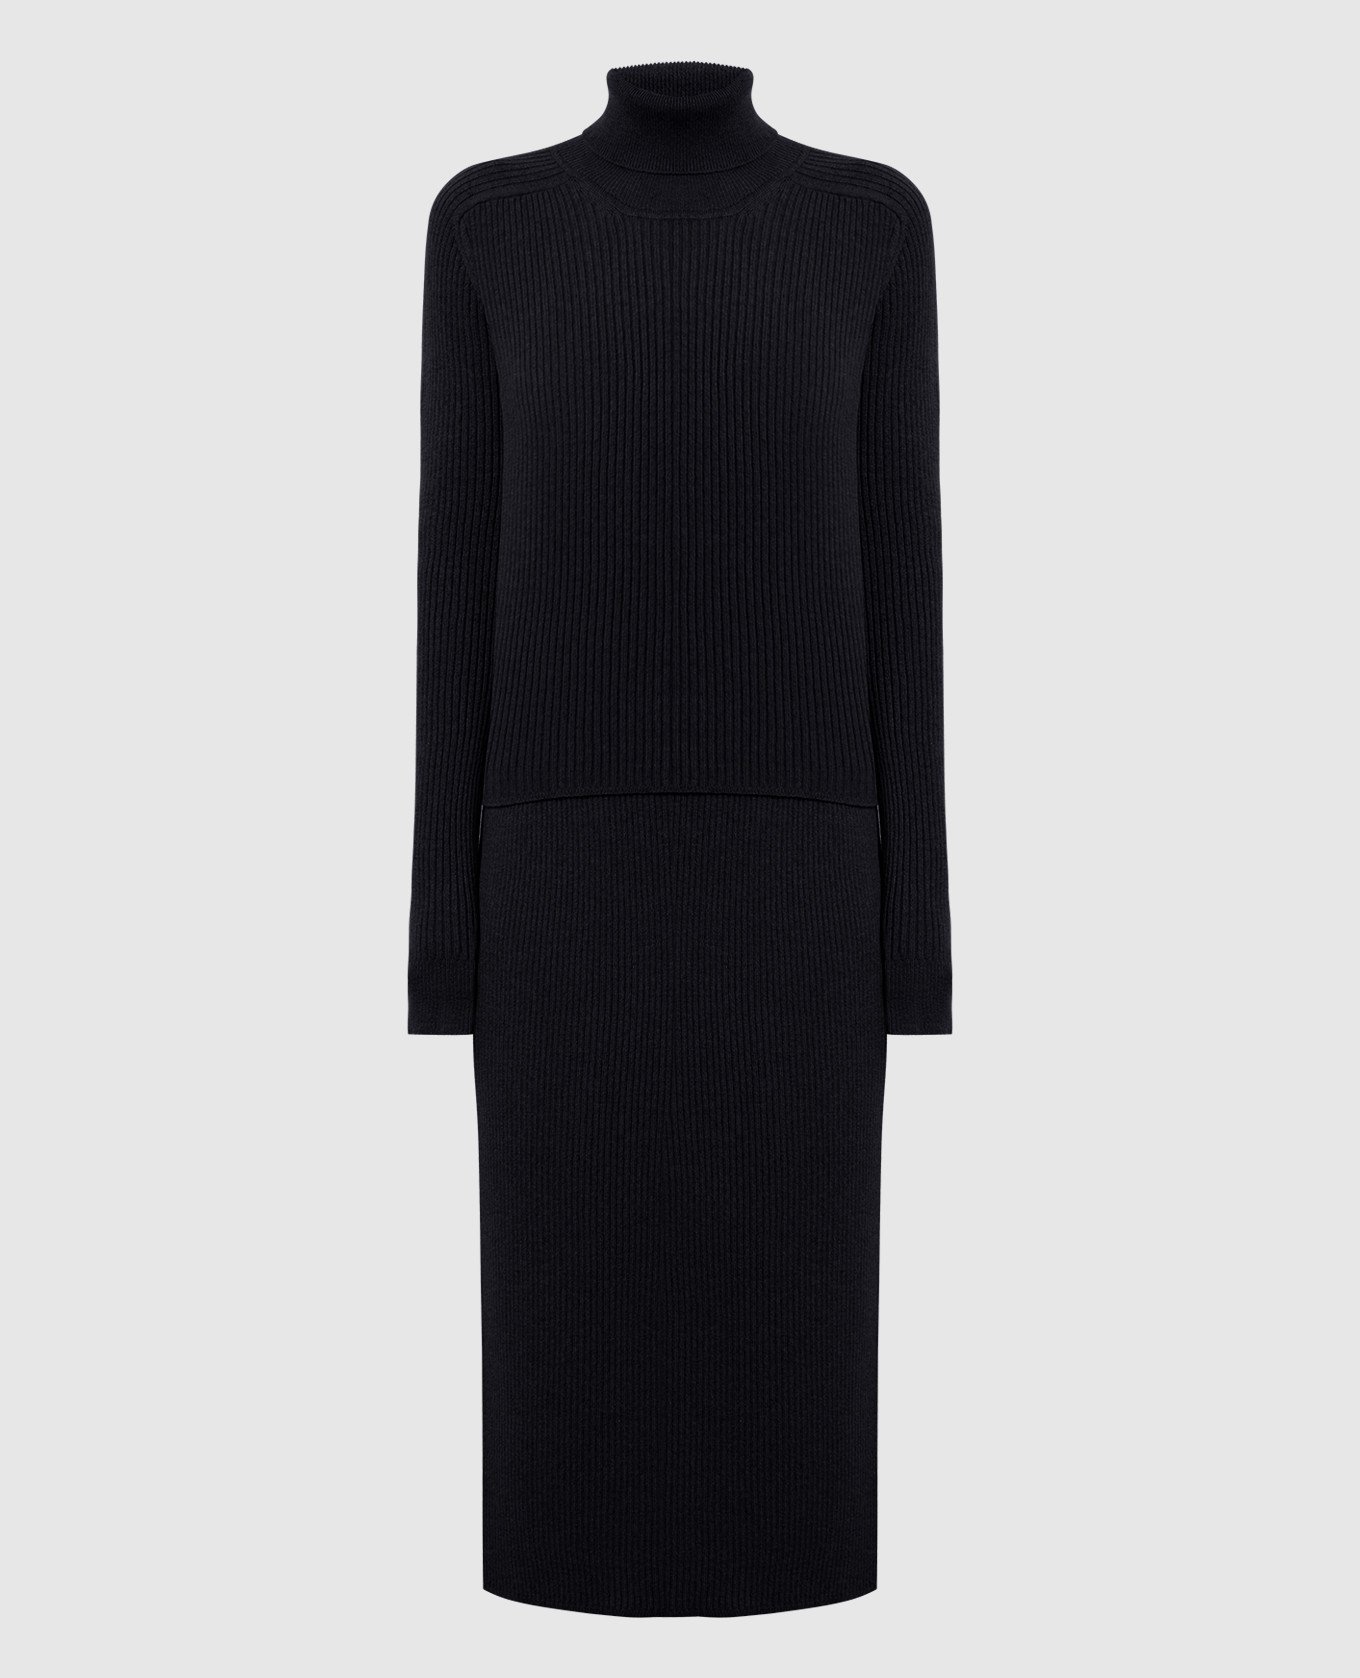 Black cashmere sweater and skirt suit